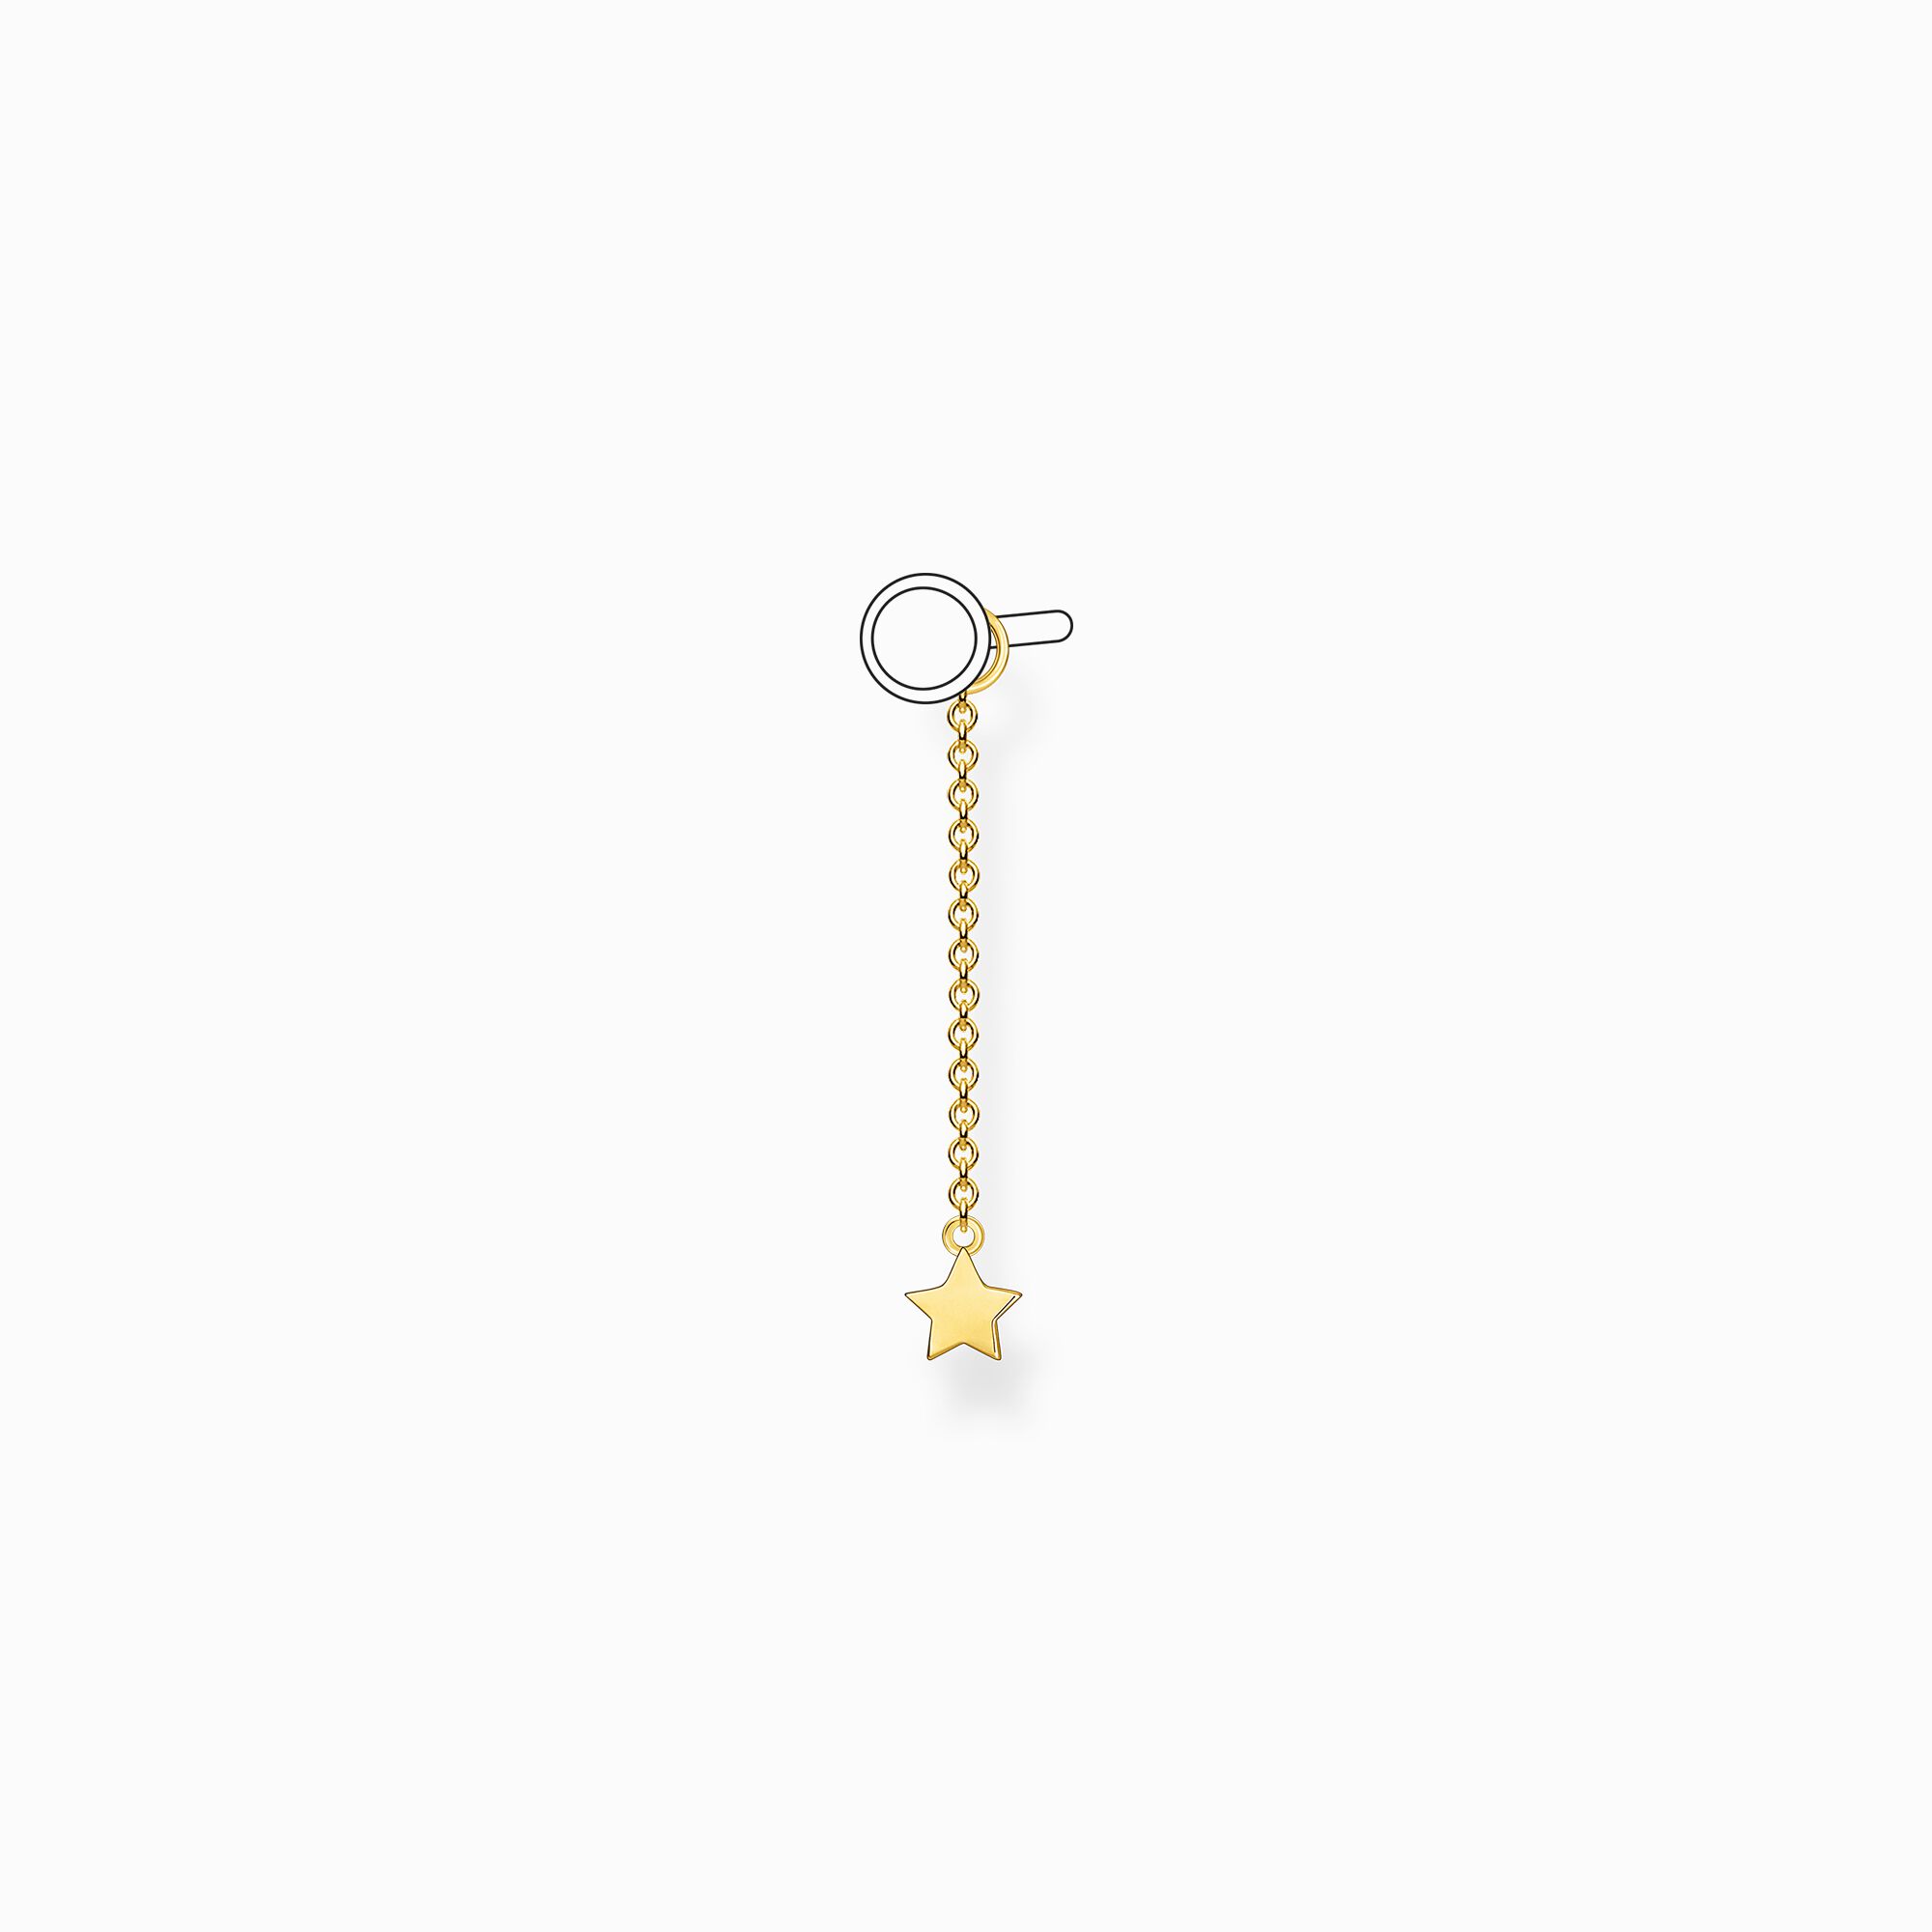 Golden earring pendant with THOMAS – chain SABO